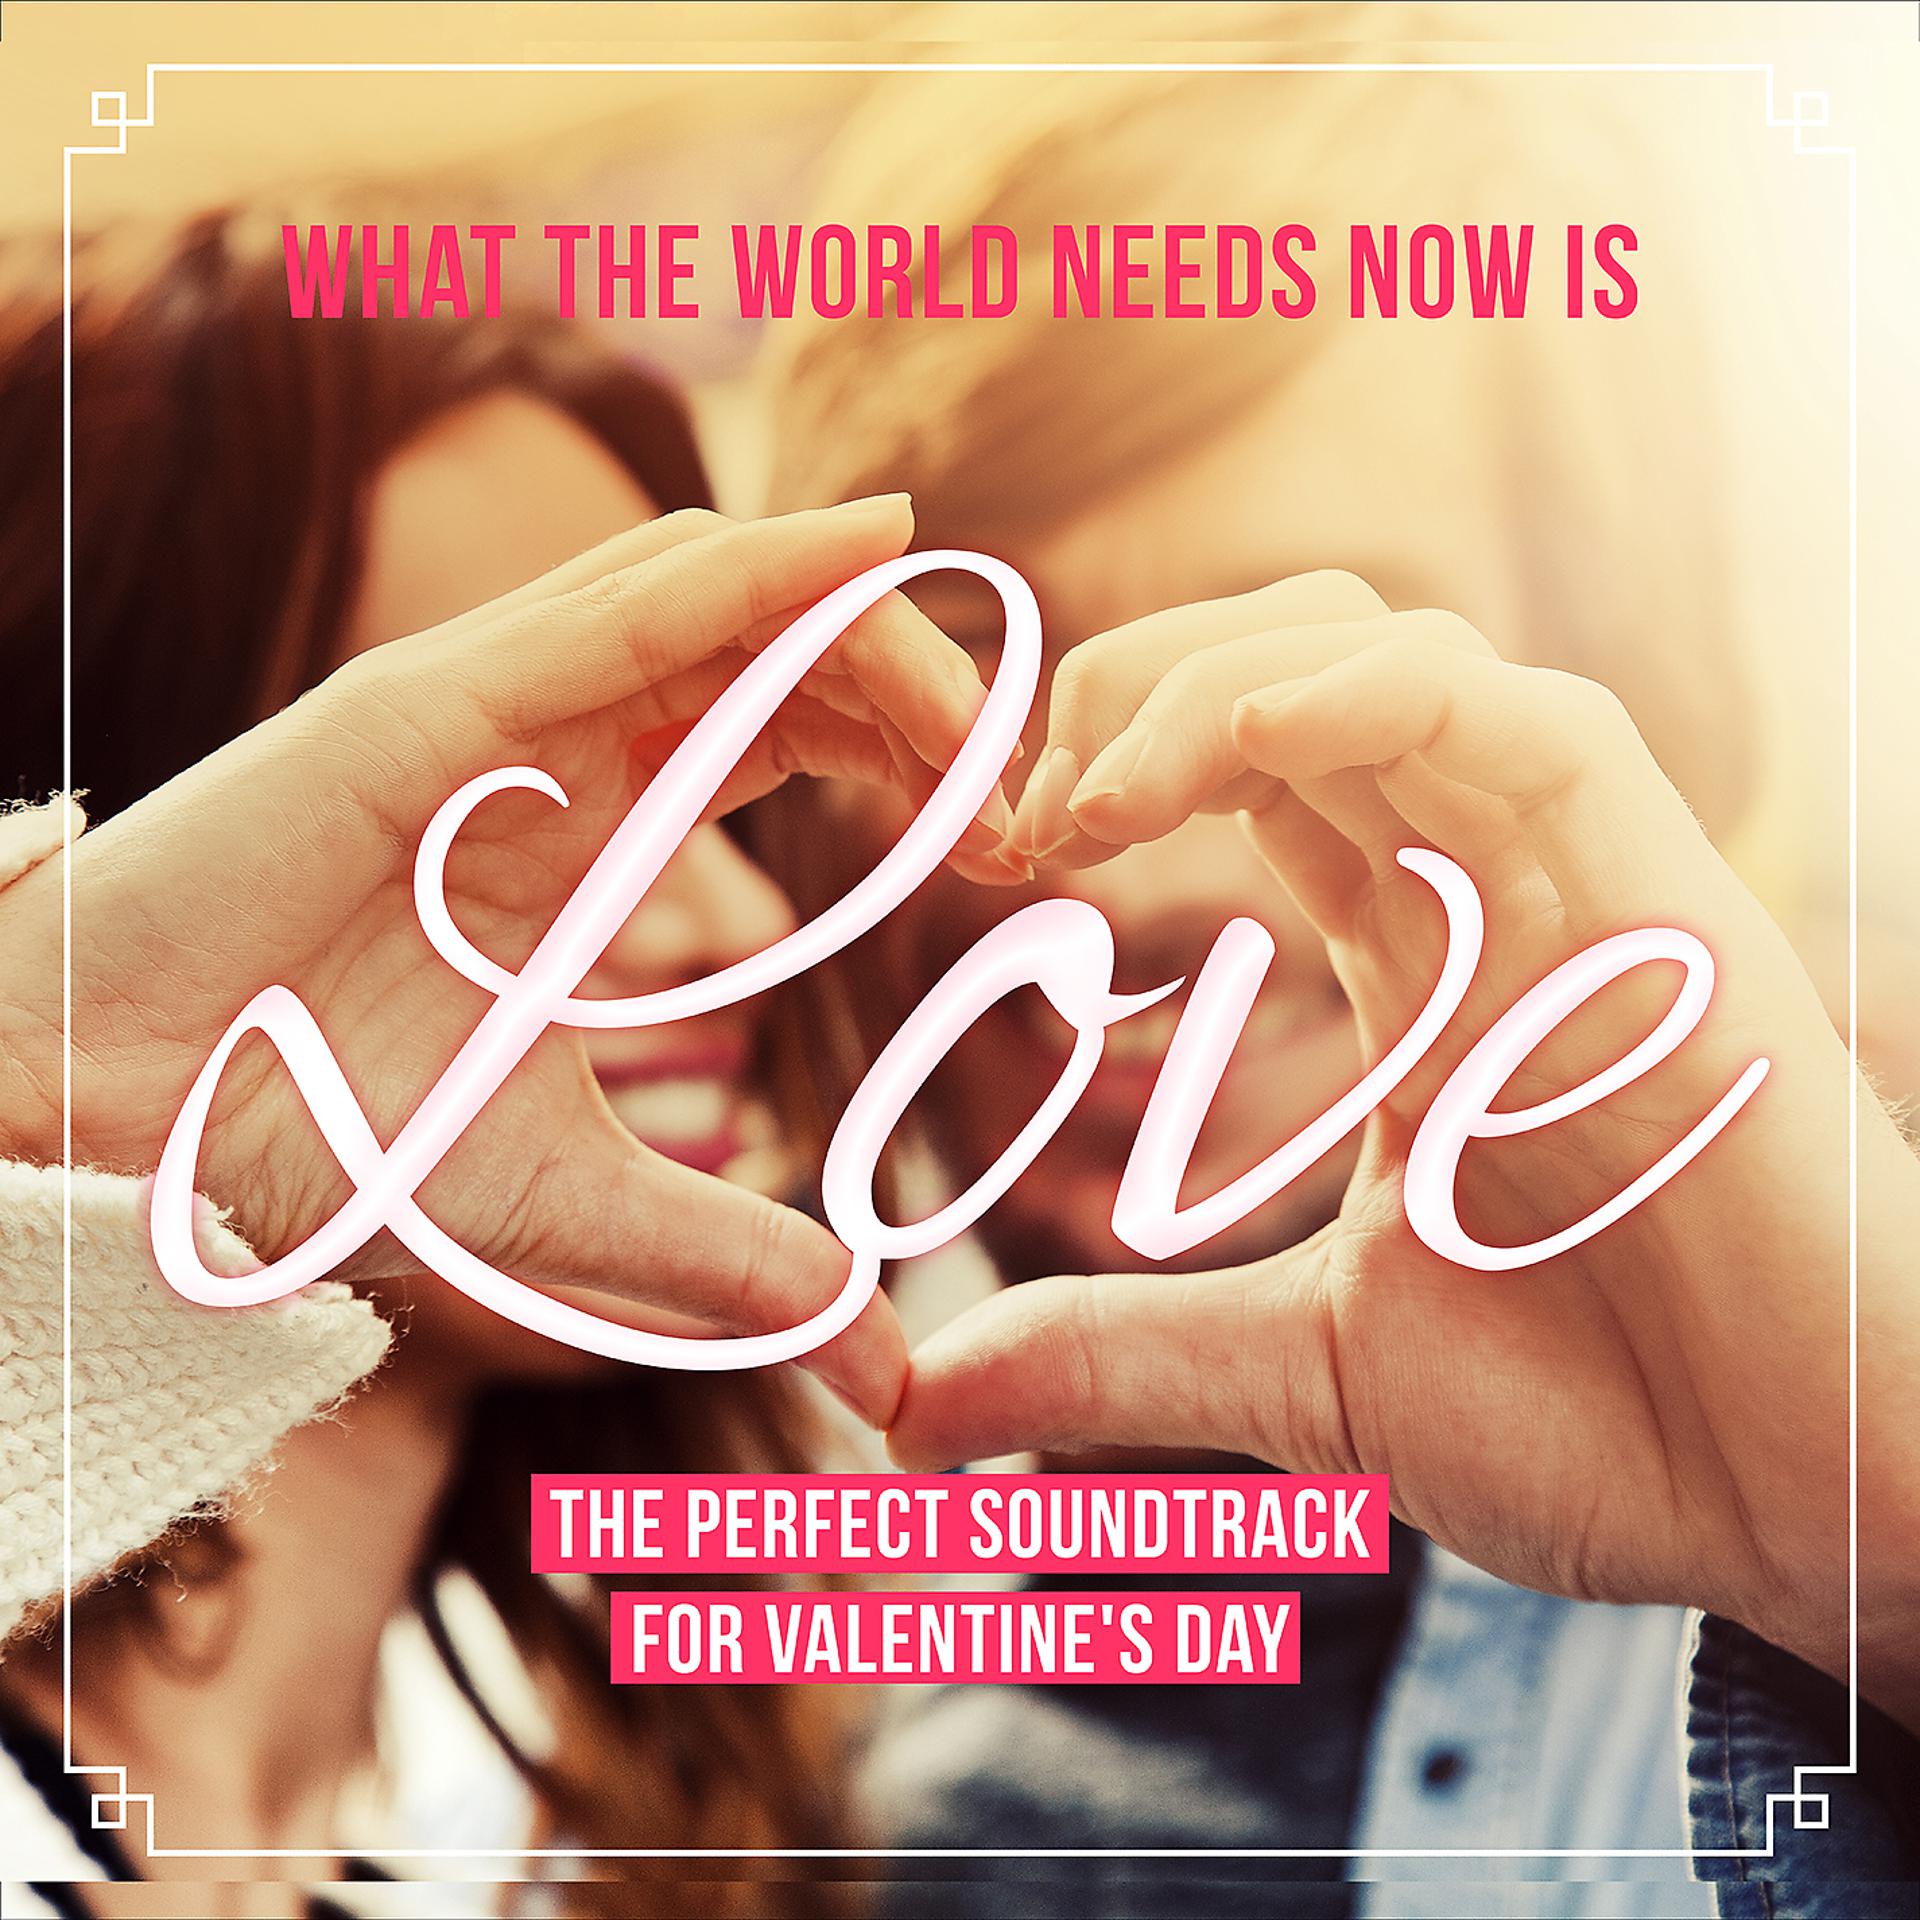 Needs now is love. What the World needs Now (is Love) саундтрек. What the World needs Now is Love.